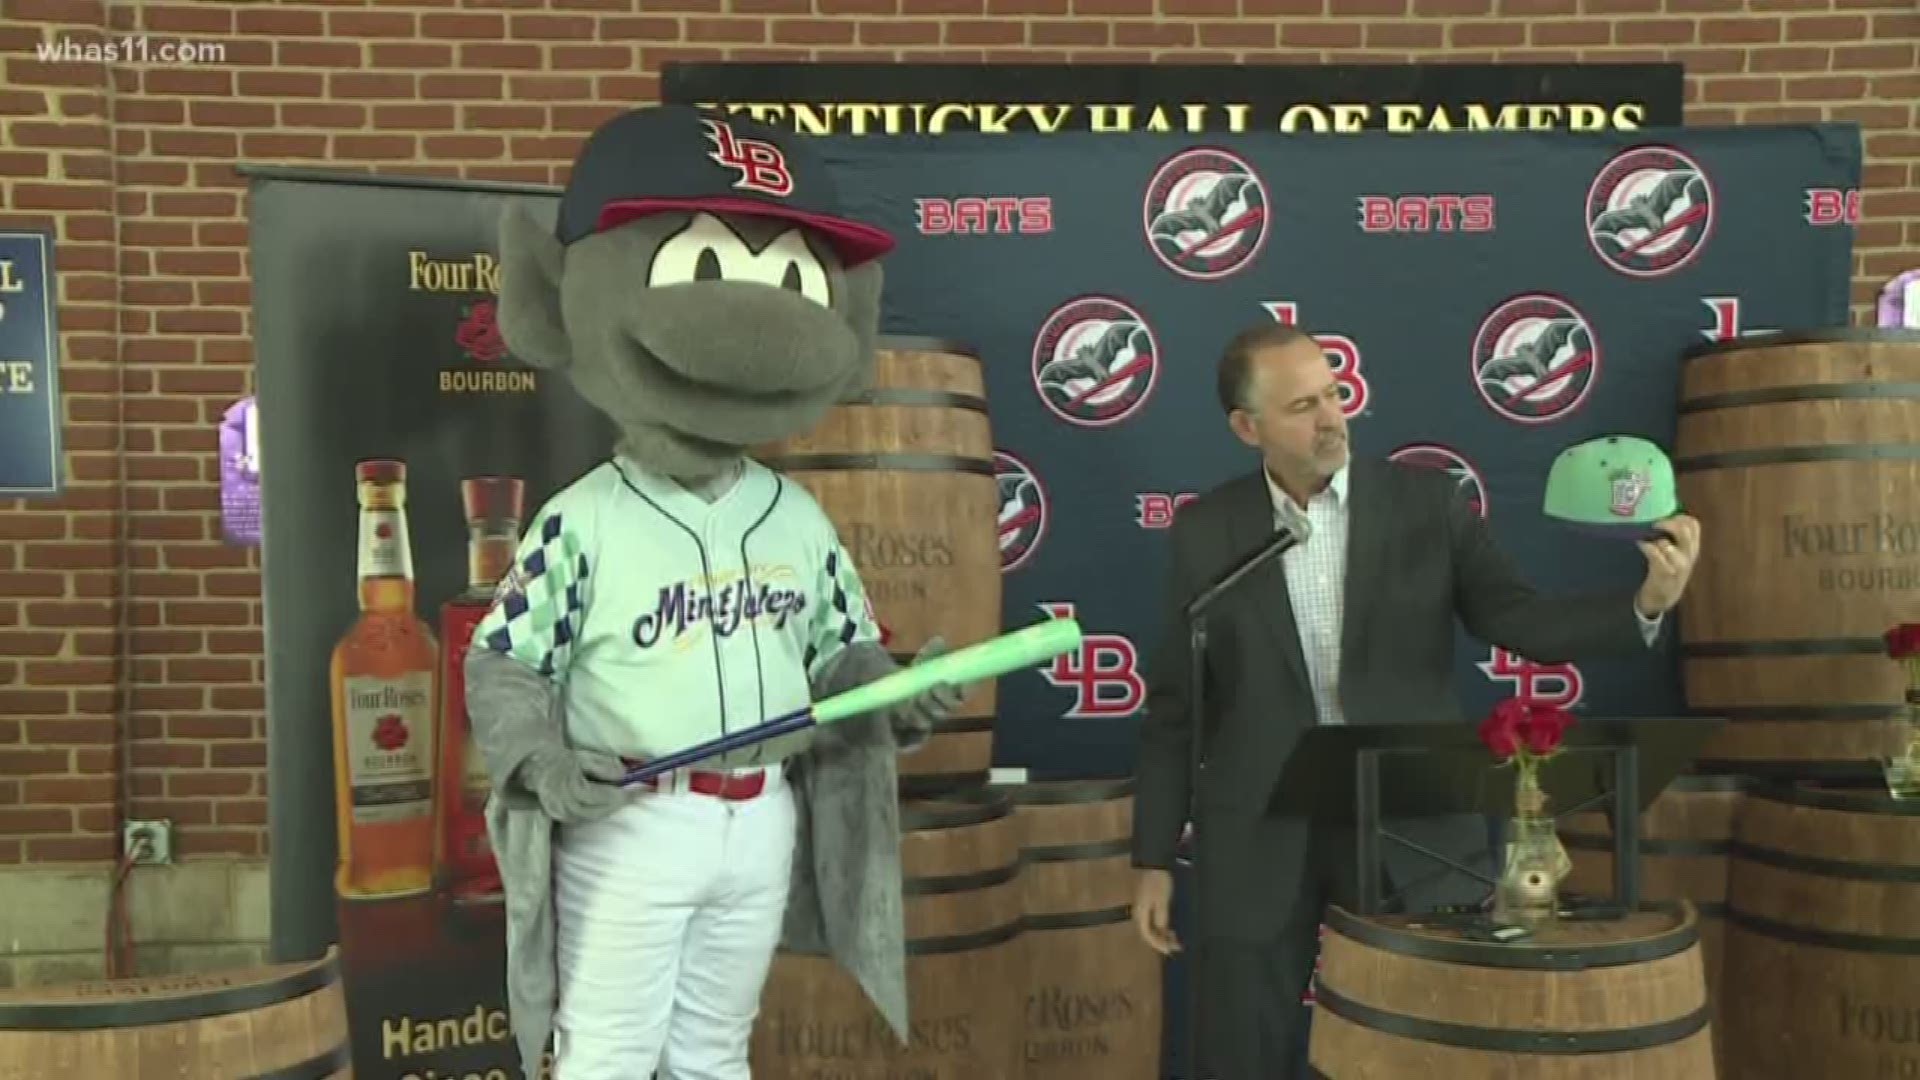 The Mint Julep is recognized by the Louisville Tourism Group and the month of April has been designated Mint Julep Month. The Bats said they wanted to celebrate the Derby season.